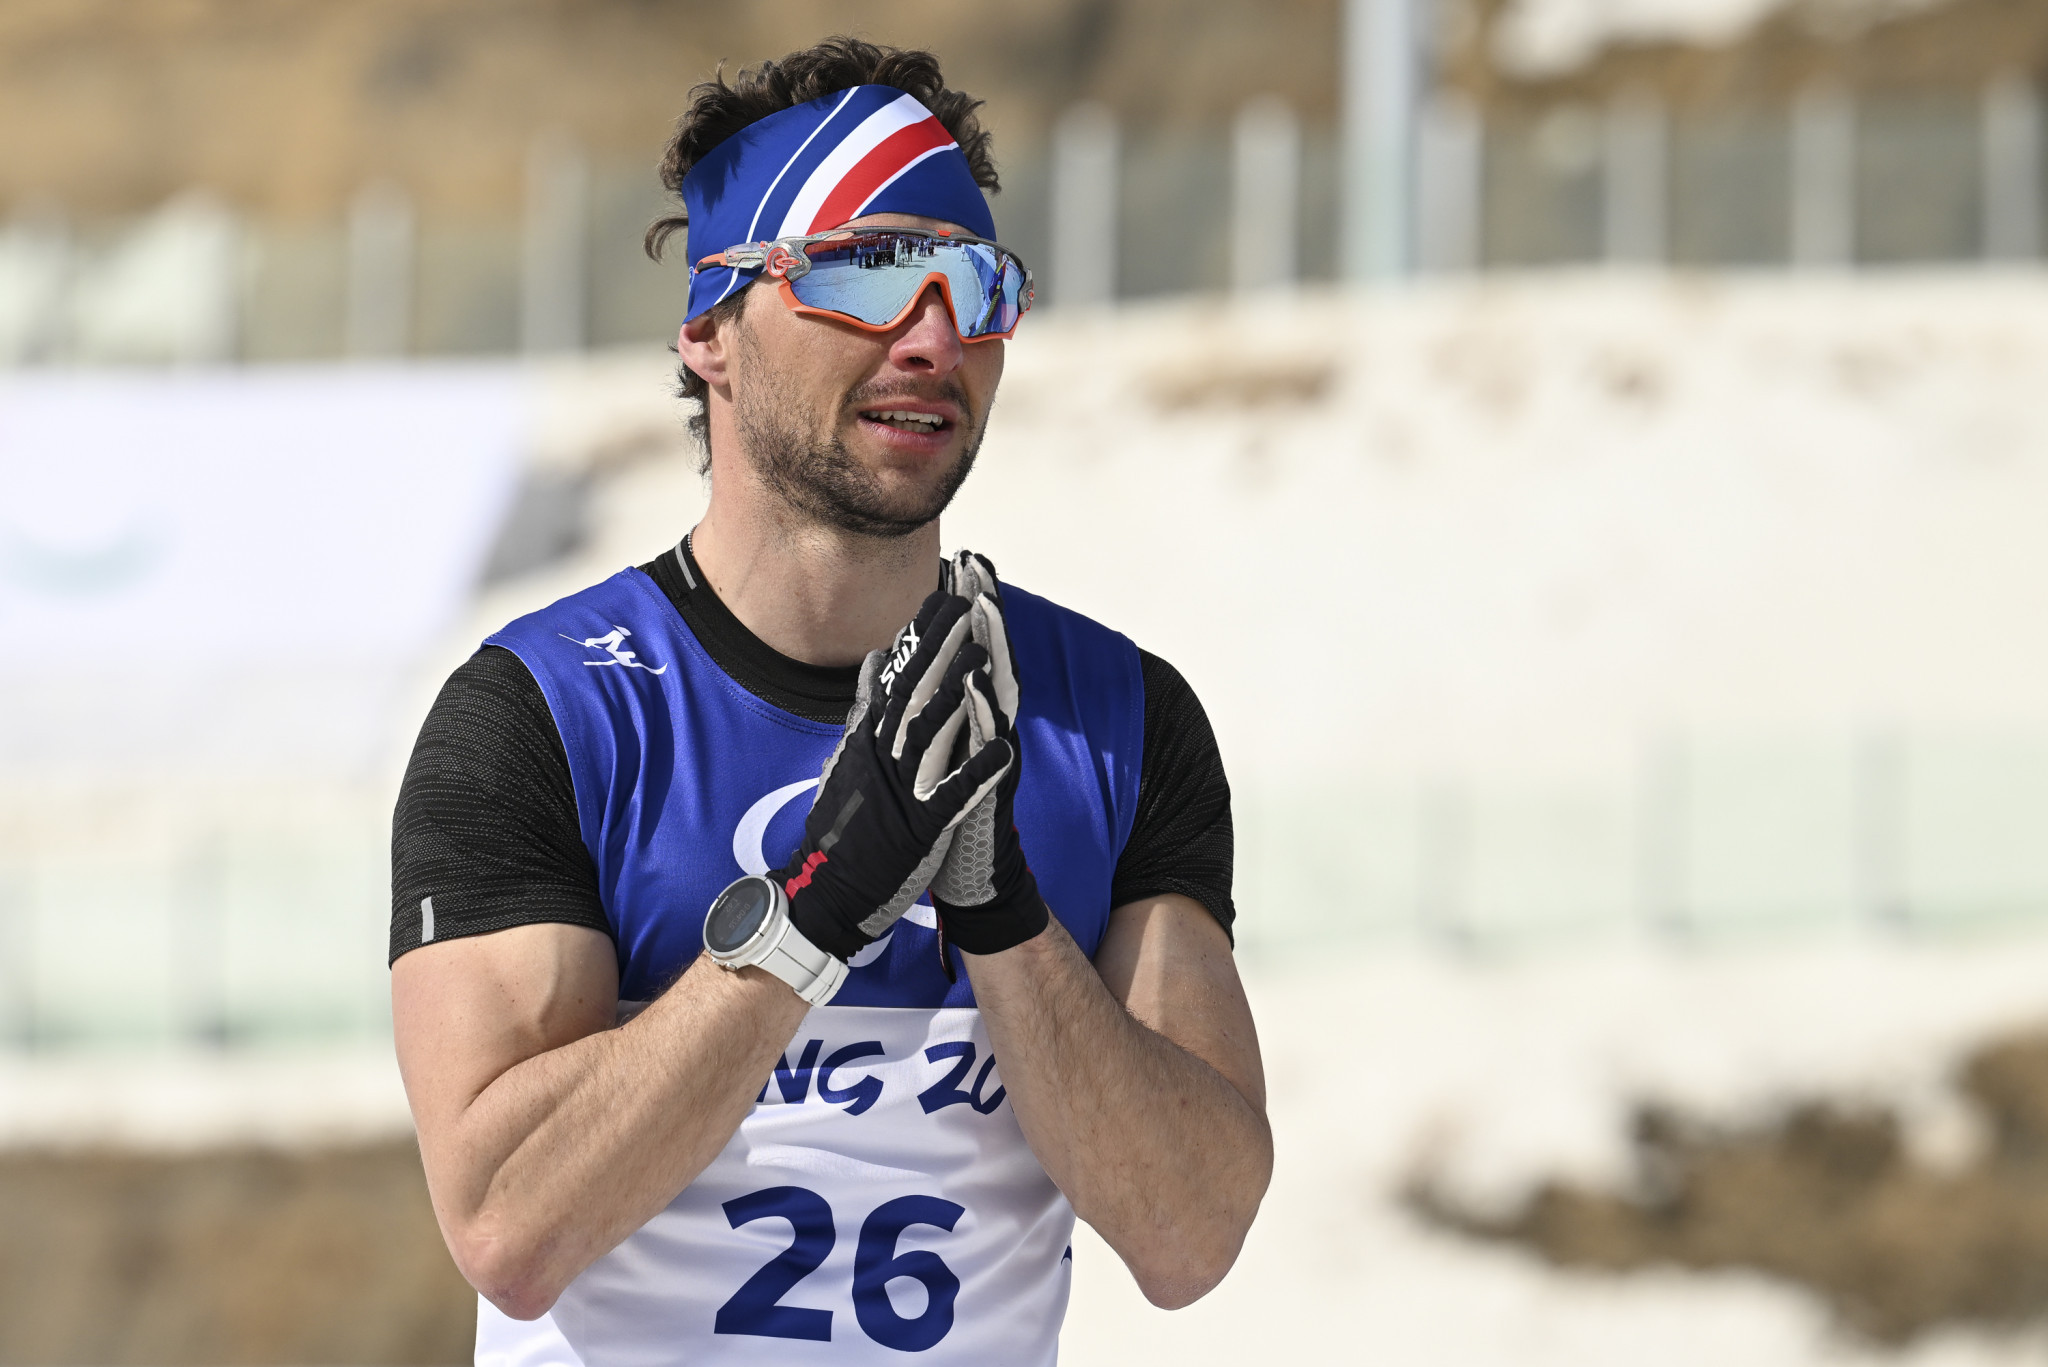 France's Benjamin Daviet secured his first biathlon gold medal of this year's Paralympics ©Getty Images